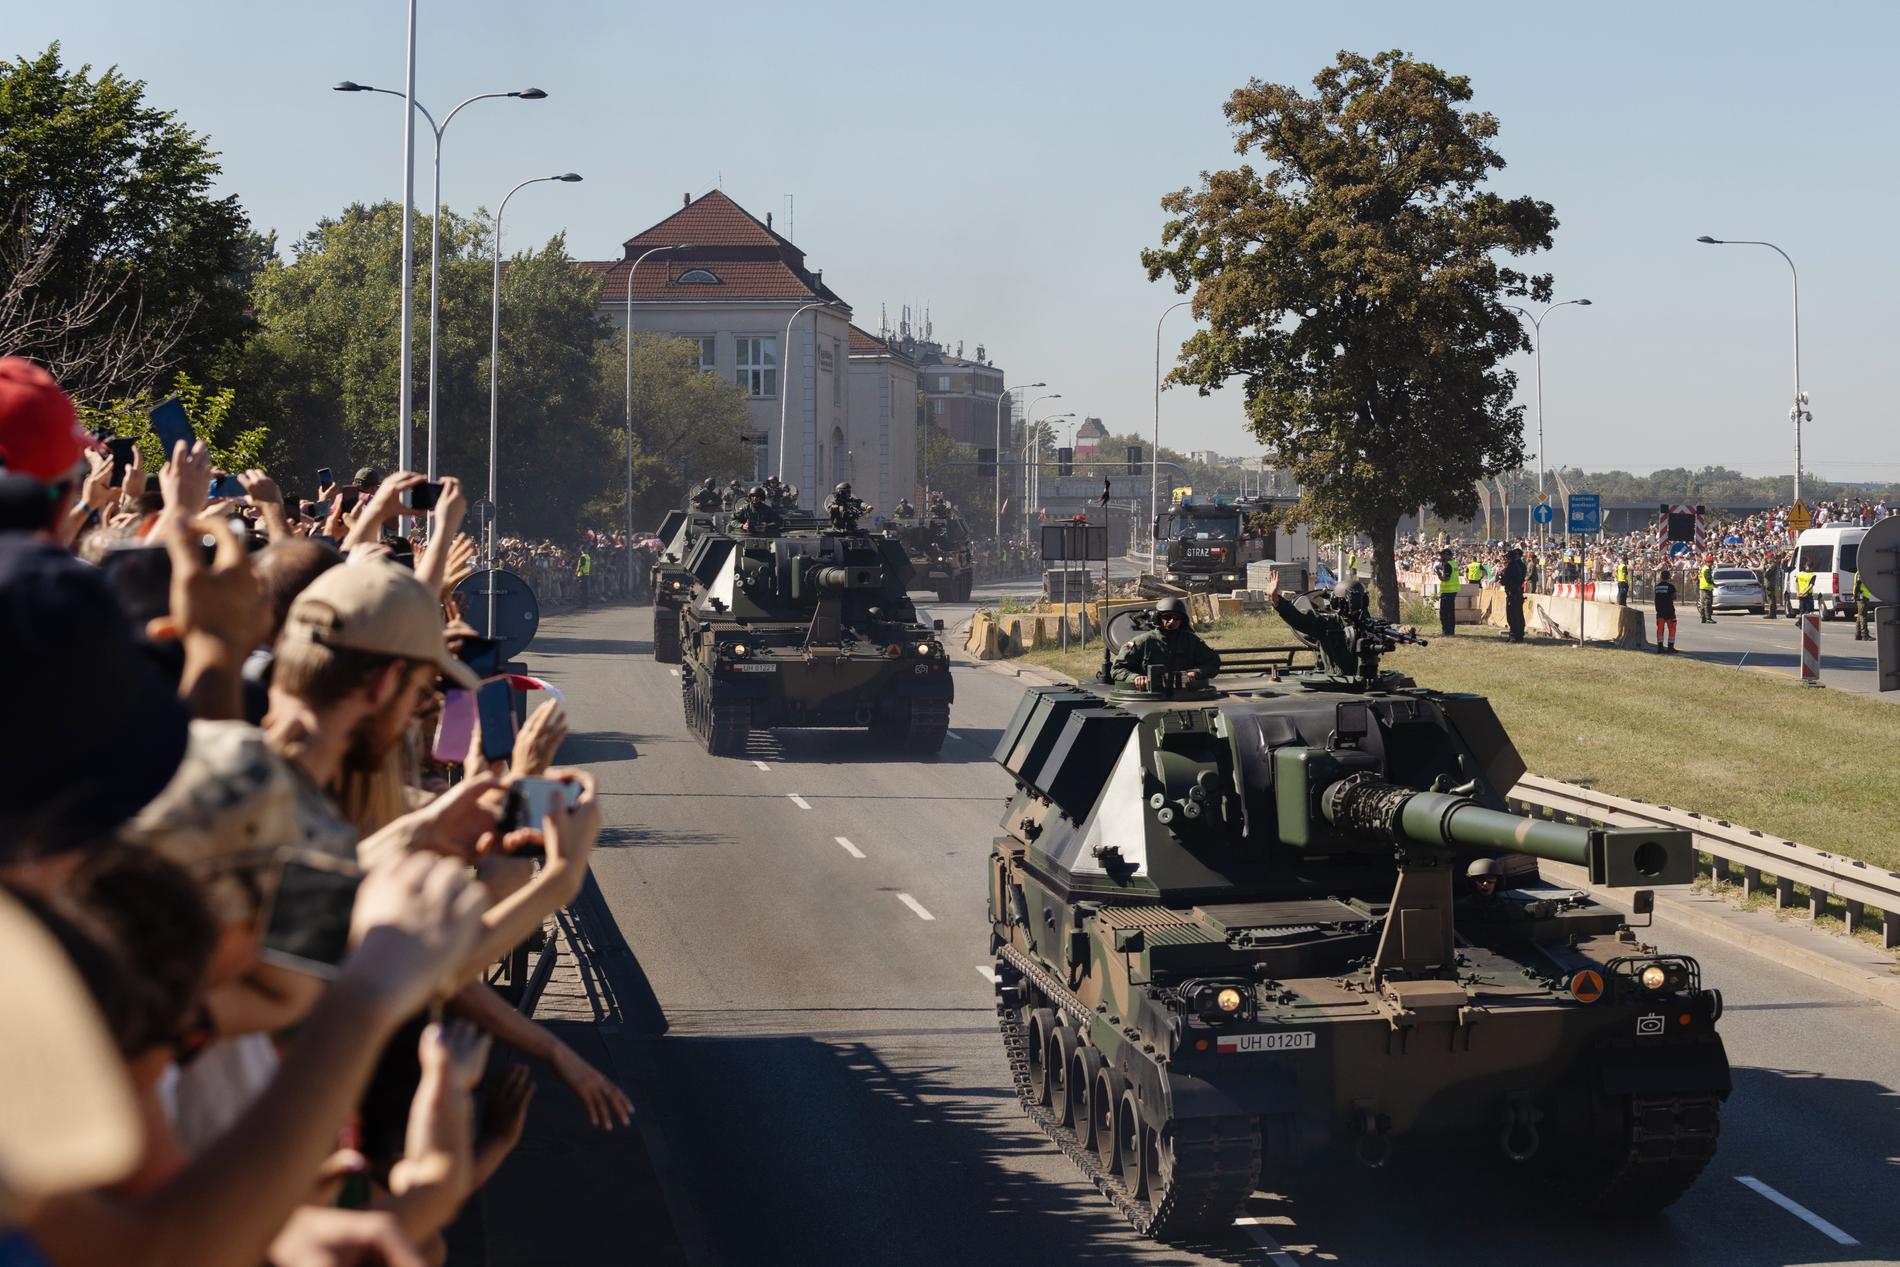 Poland’s Ambitious Plan to Become Europe’s Military Superpower